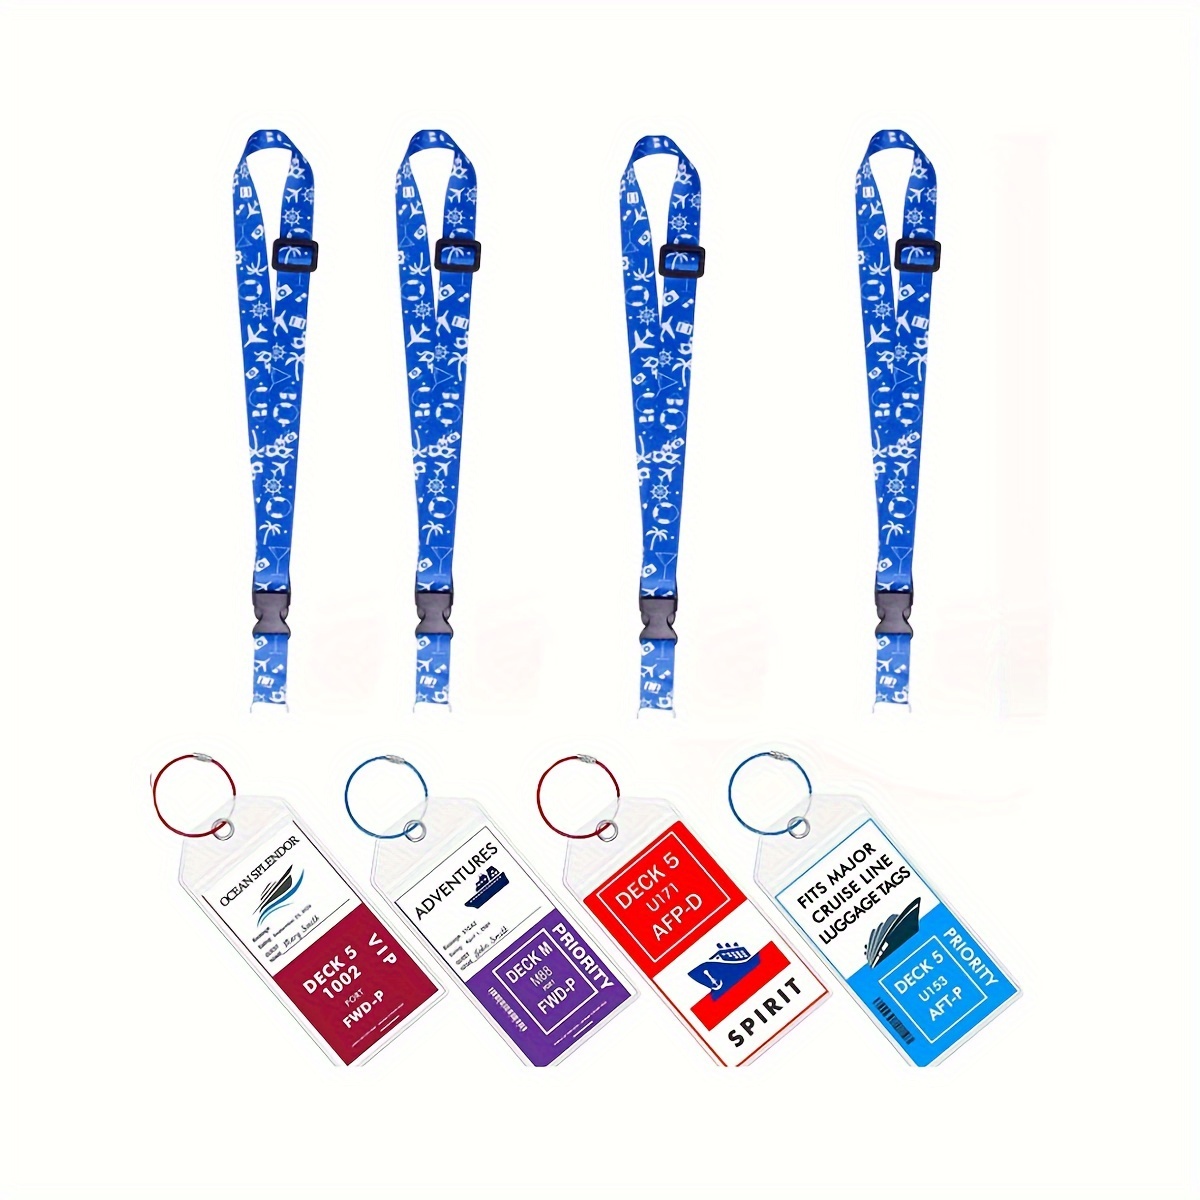 6 Sets Cruise Lanyards for Cruise Ship Cards Retractable Cruise Lanyards  Waterproof ID Badge Holders with 8 Pcs Cruise Luggage Tags for Carnival